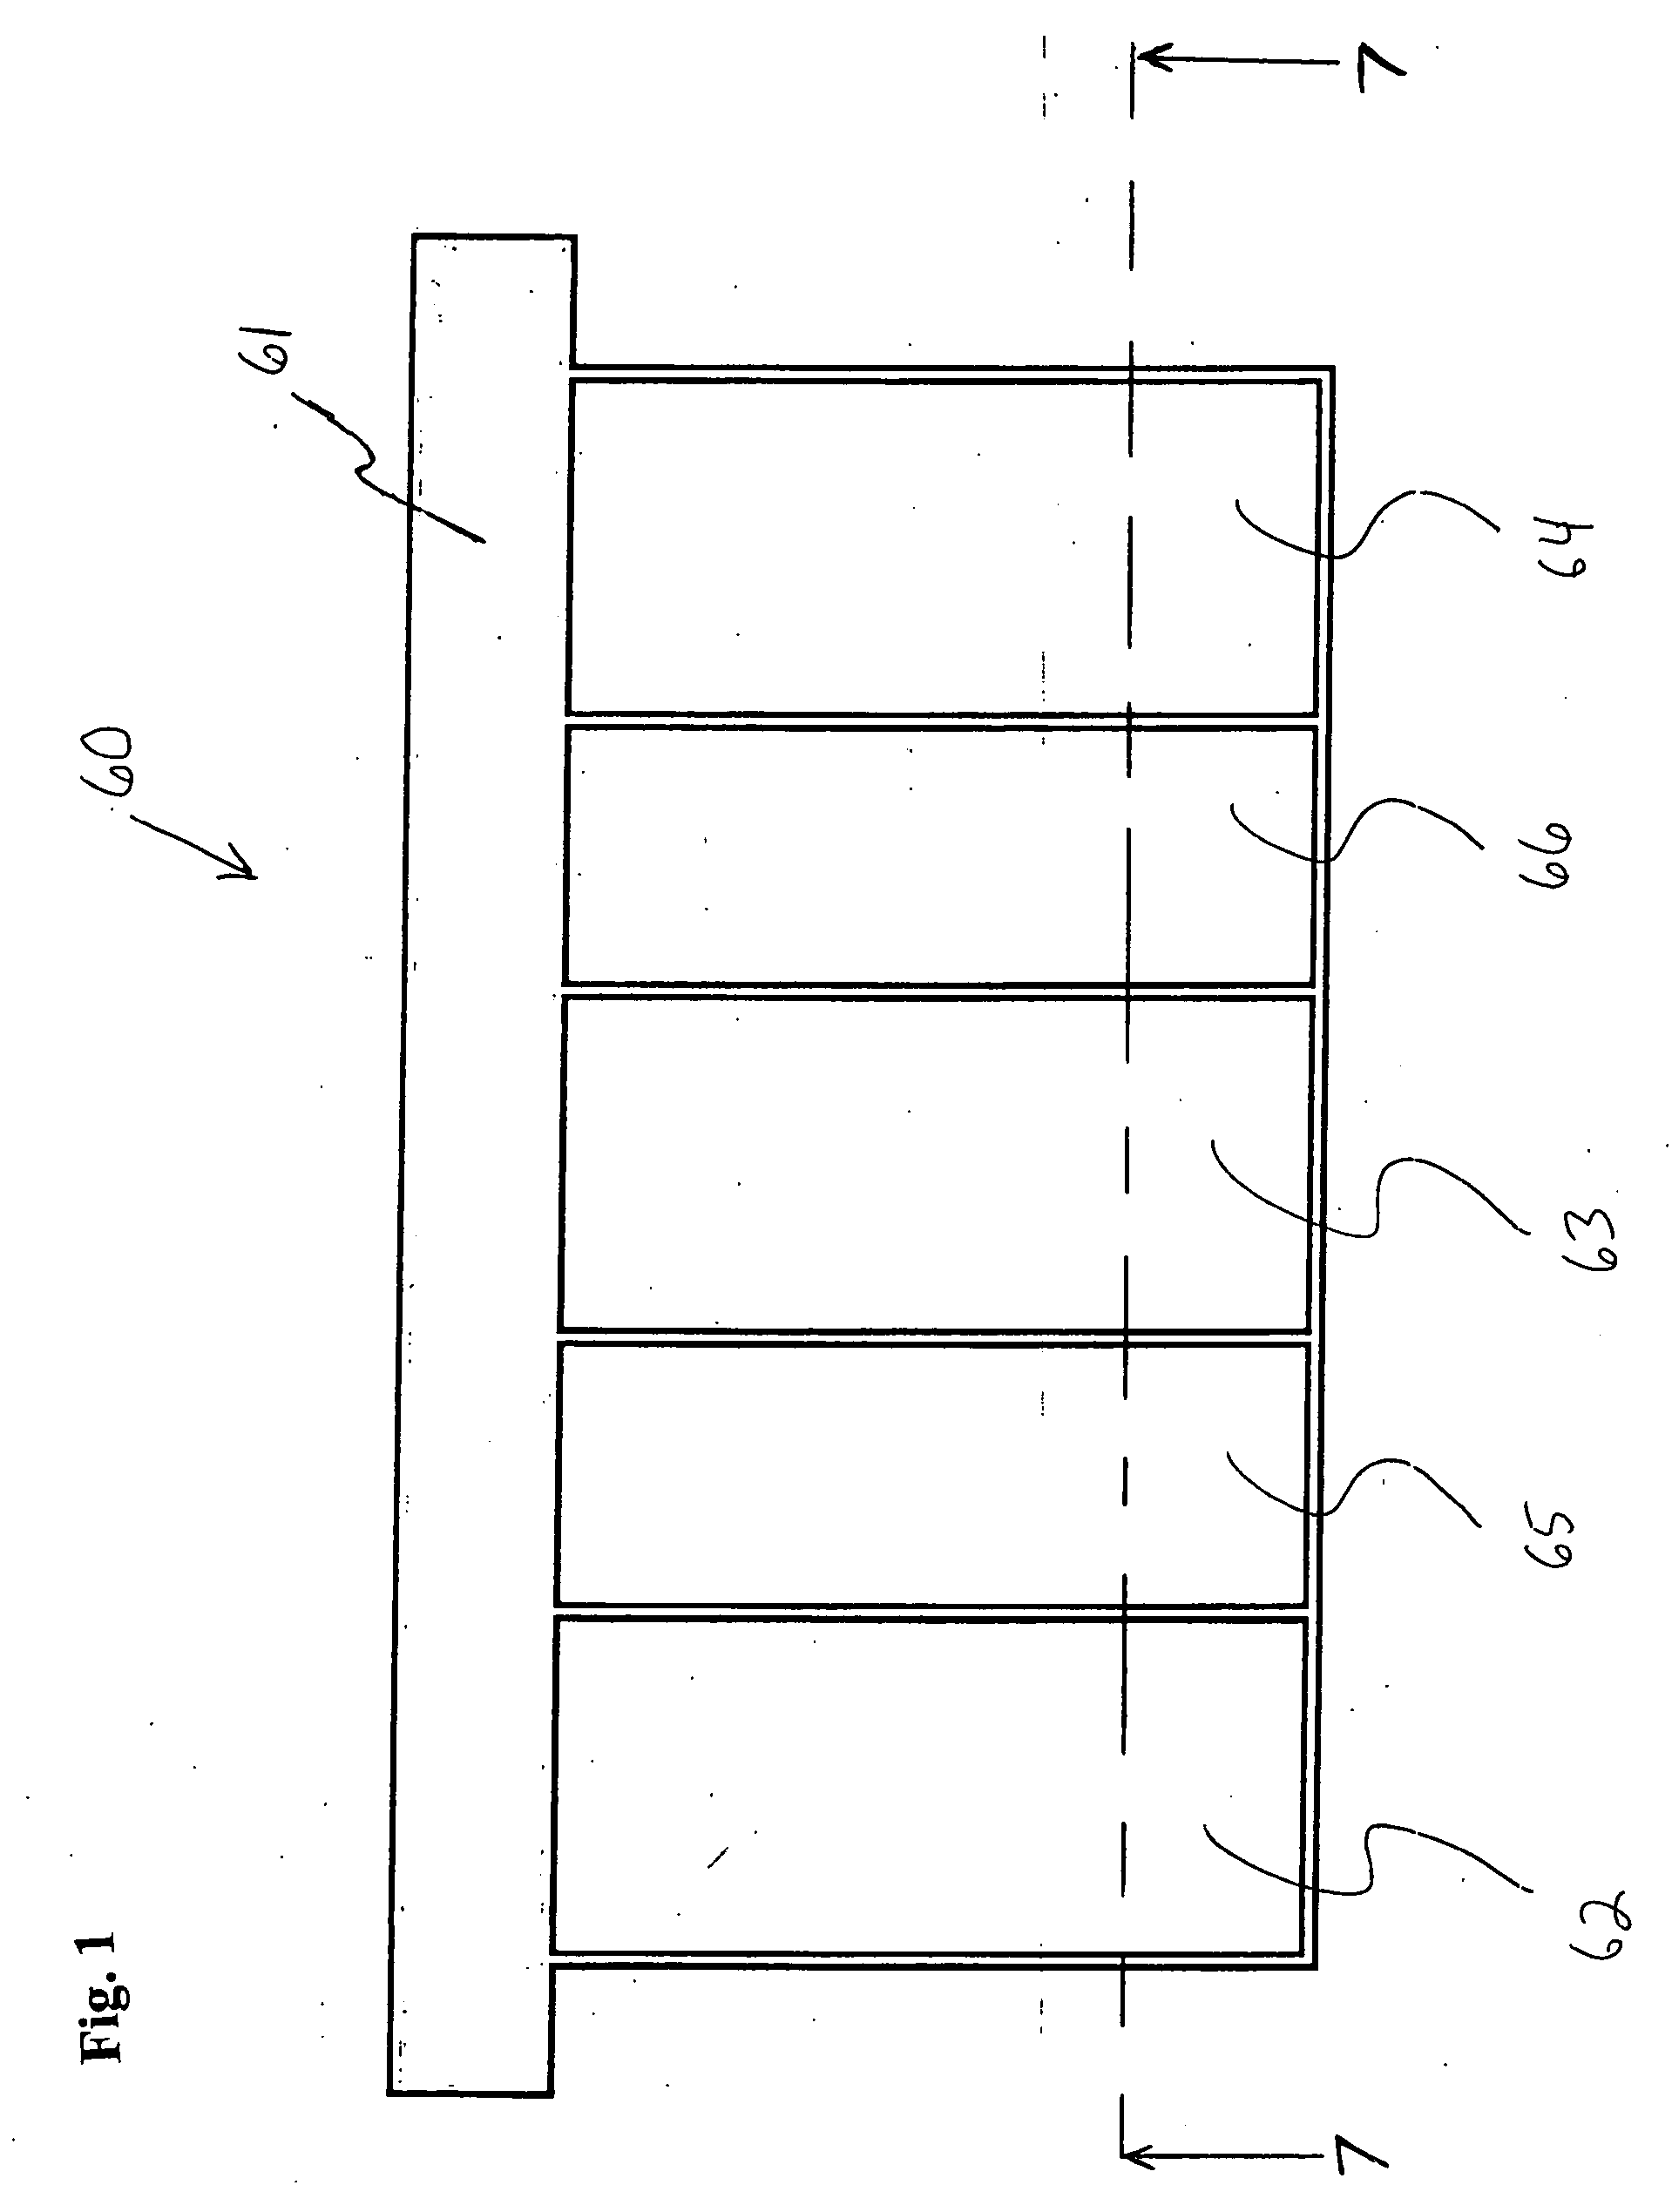 Method and apparatus for dissipating heat, and radar antenna containing heat dissipating apparatus